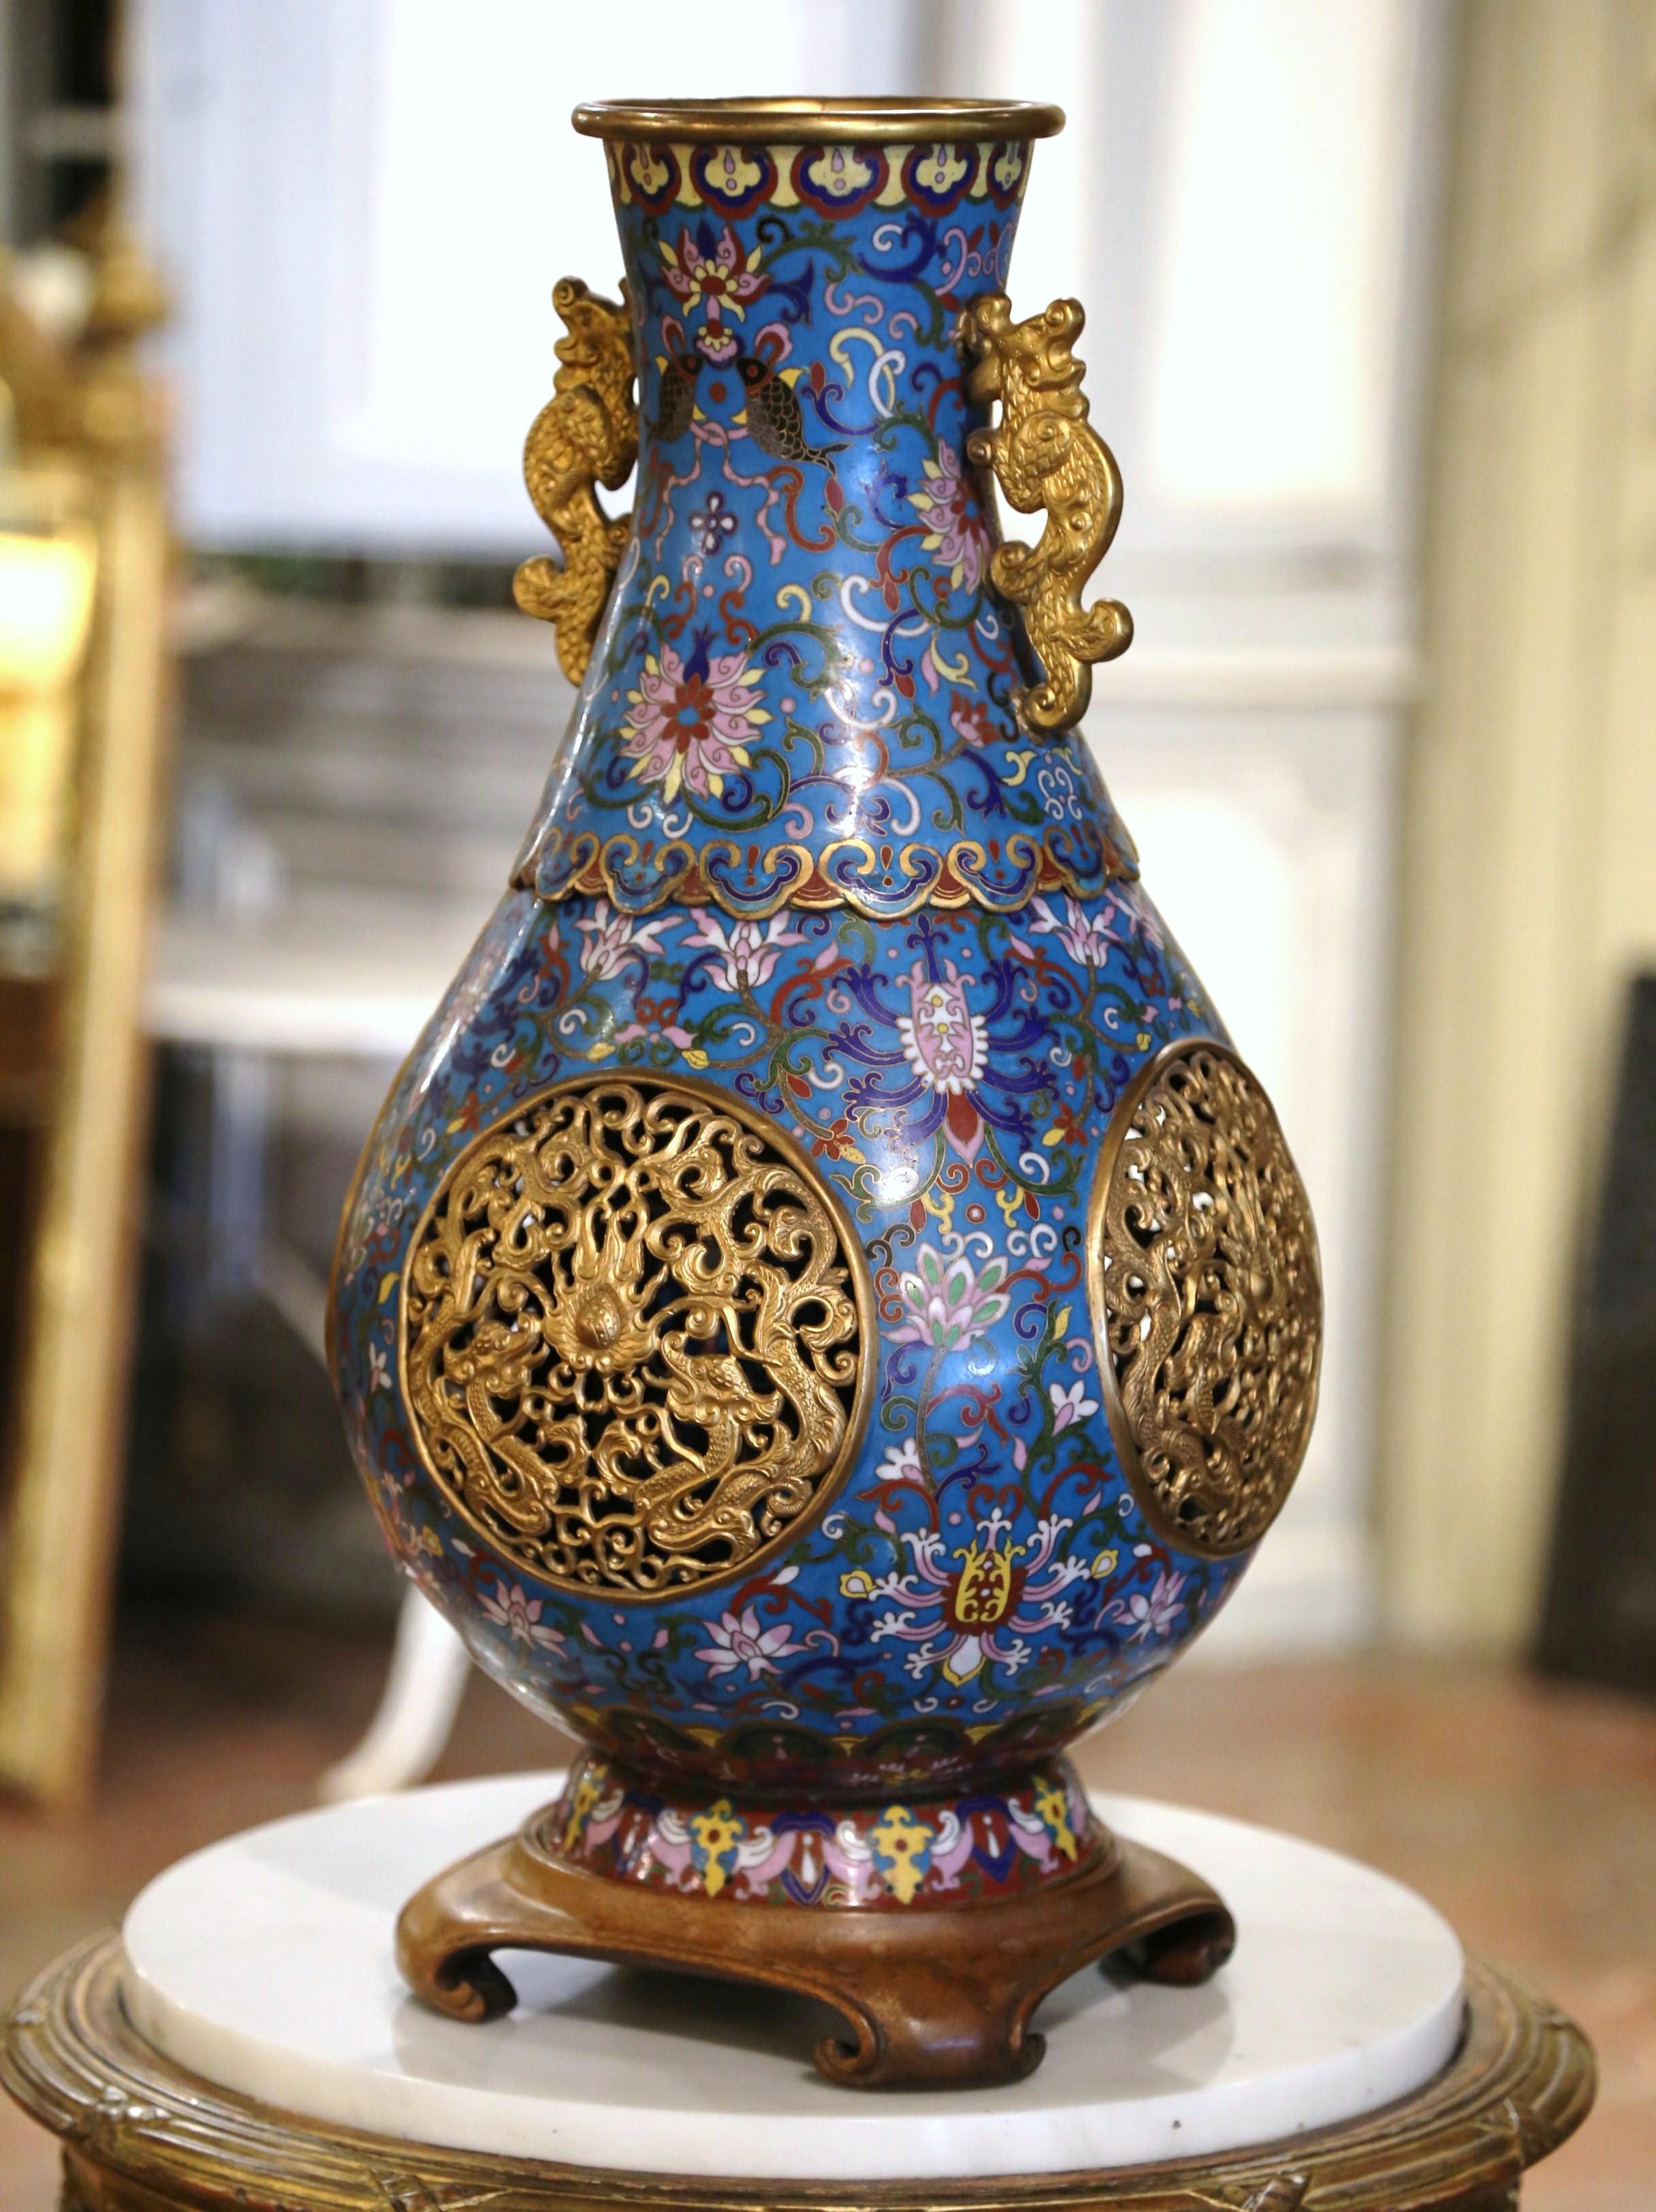 19th Century Chinese Cloisonne Enamel Reticulated Vase on Stand For Sale 1